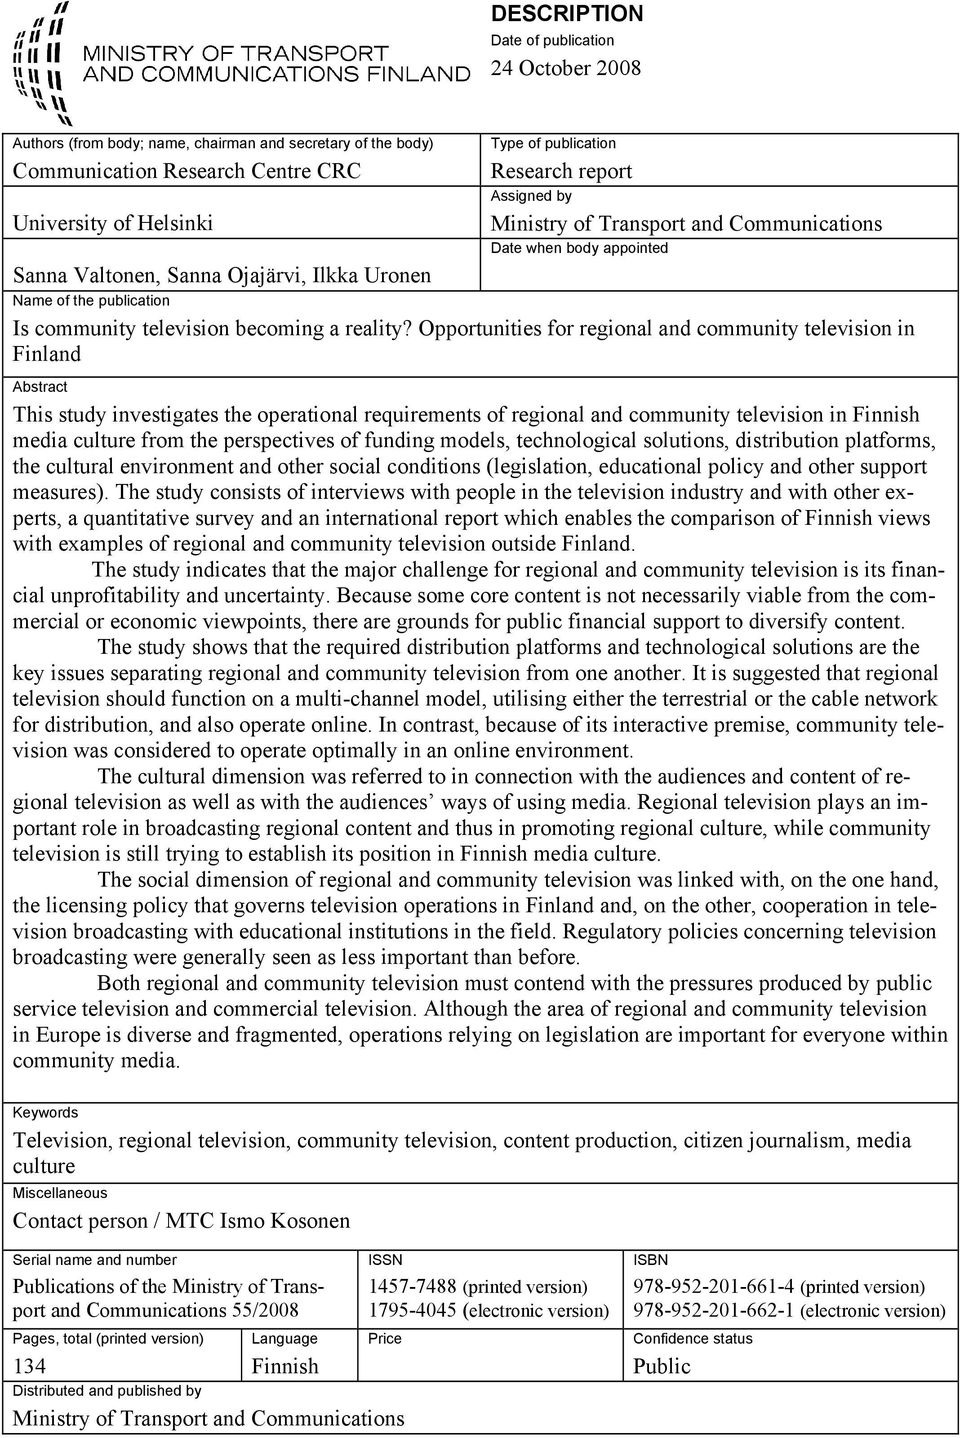 Opportunities for regional and community television in Finland Abstract This study investigates the operational requirements of regional and community television in Finnish media culture from the